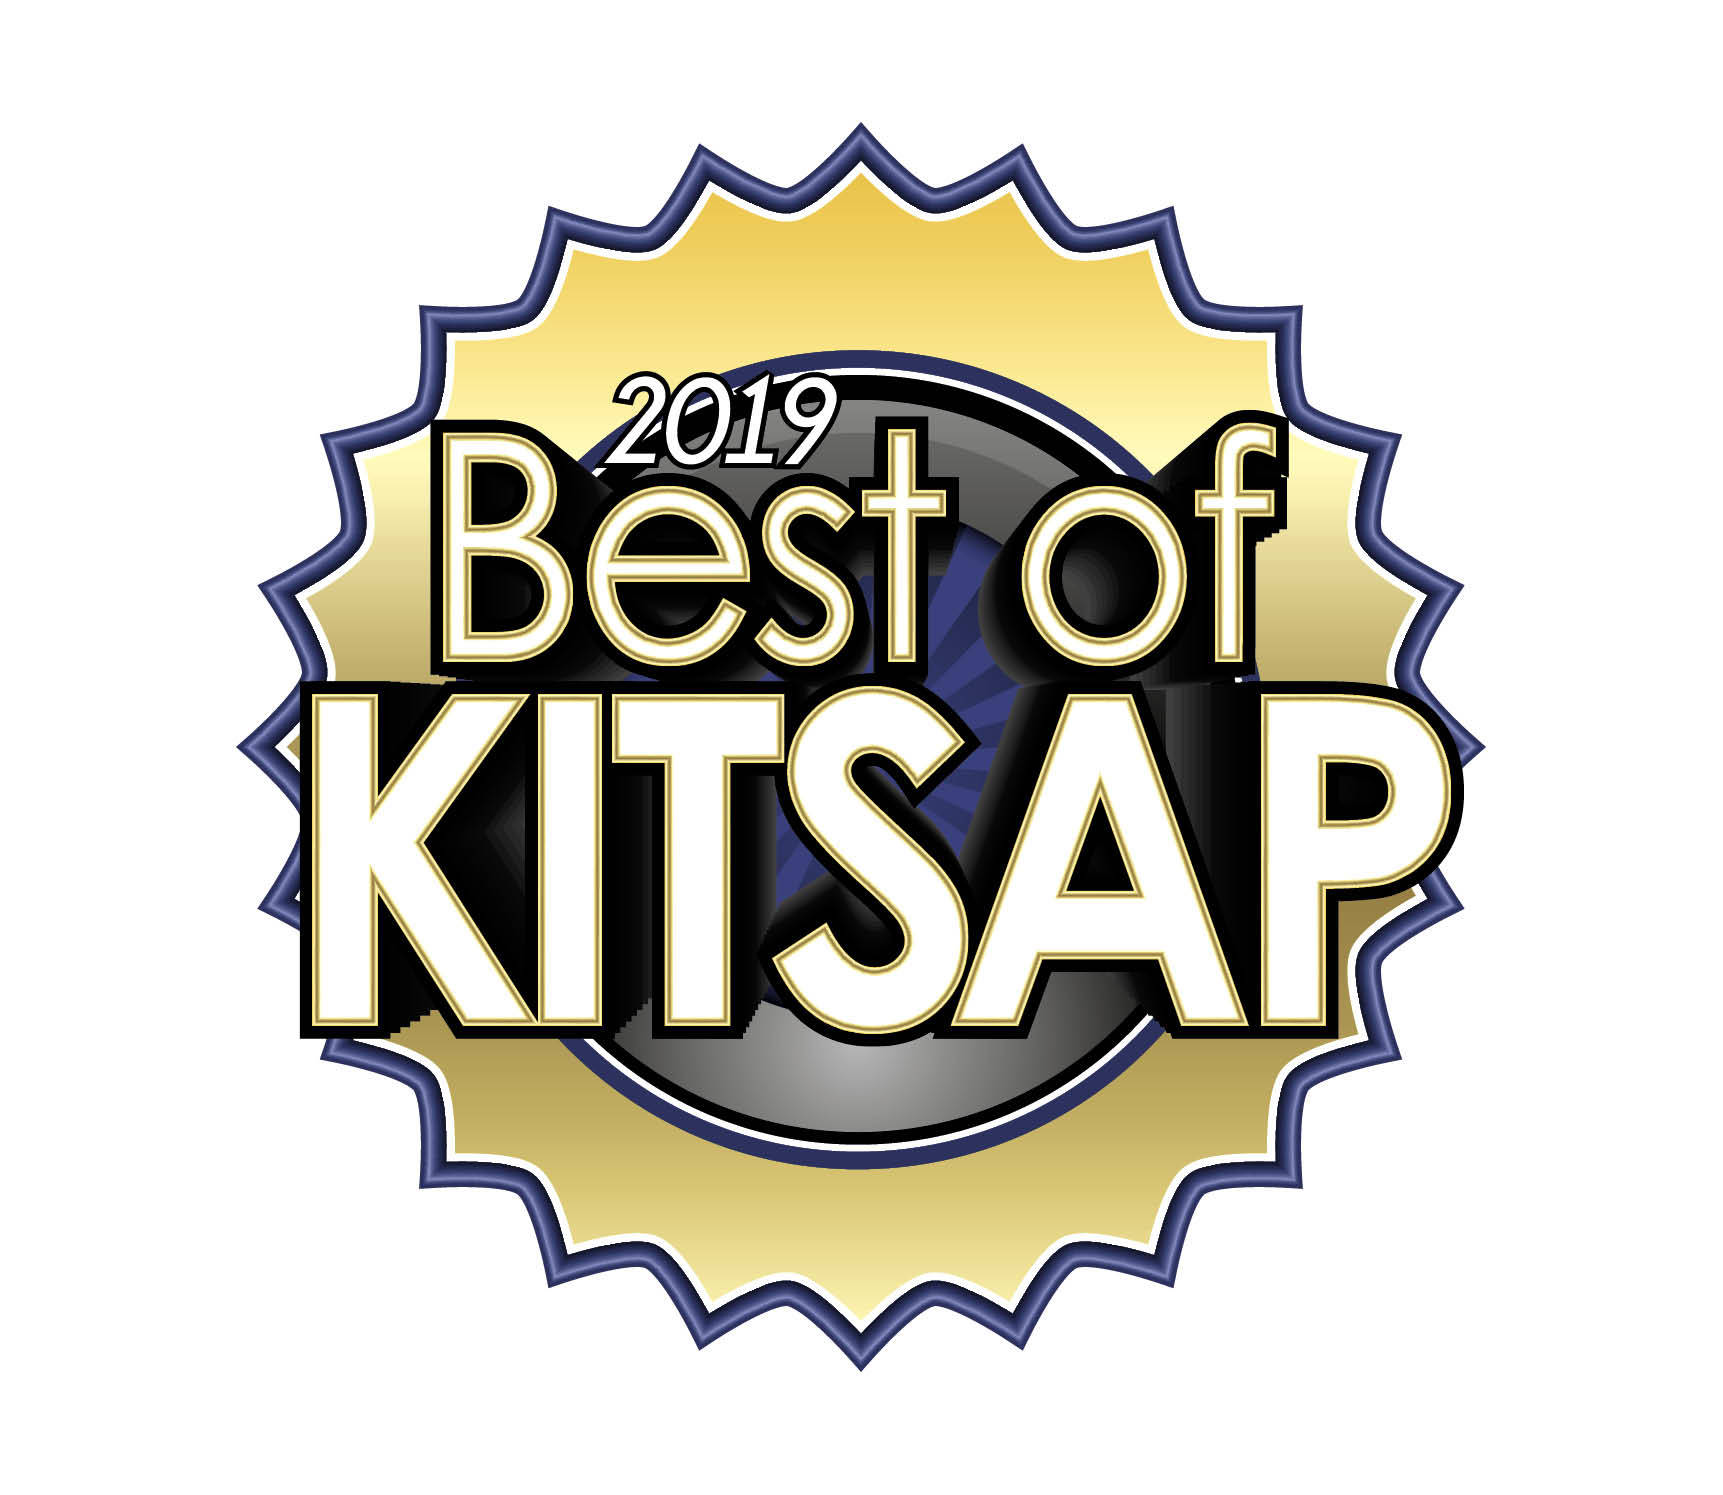 Vote for your top picks for ‘Best of Kitsap’ Kitsap Daily News